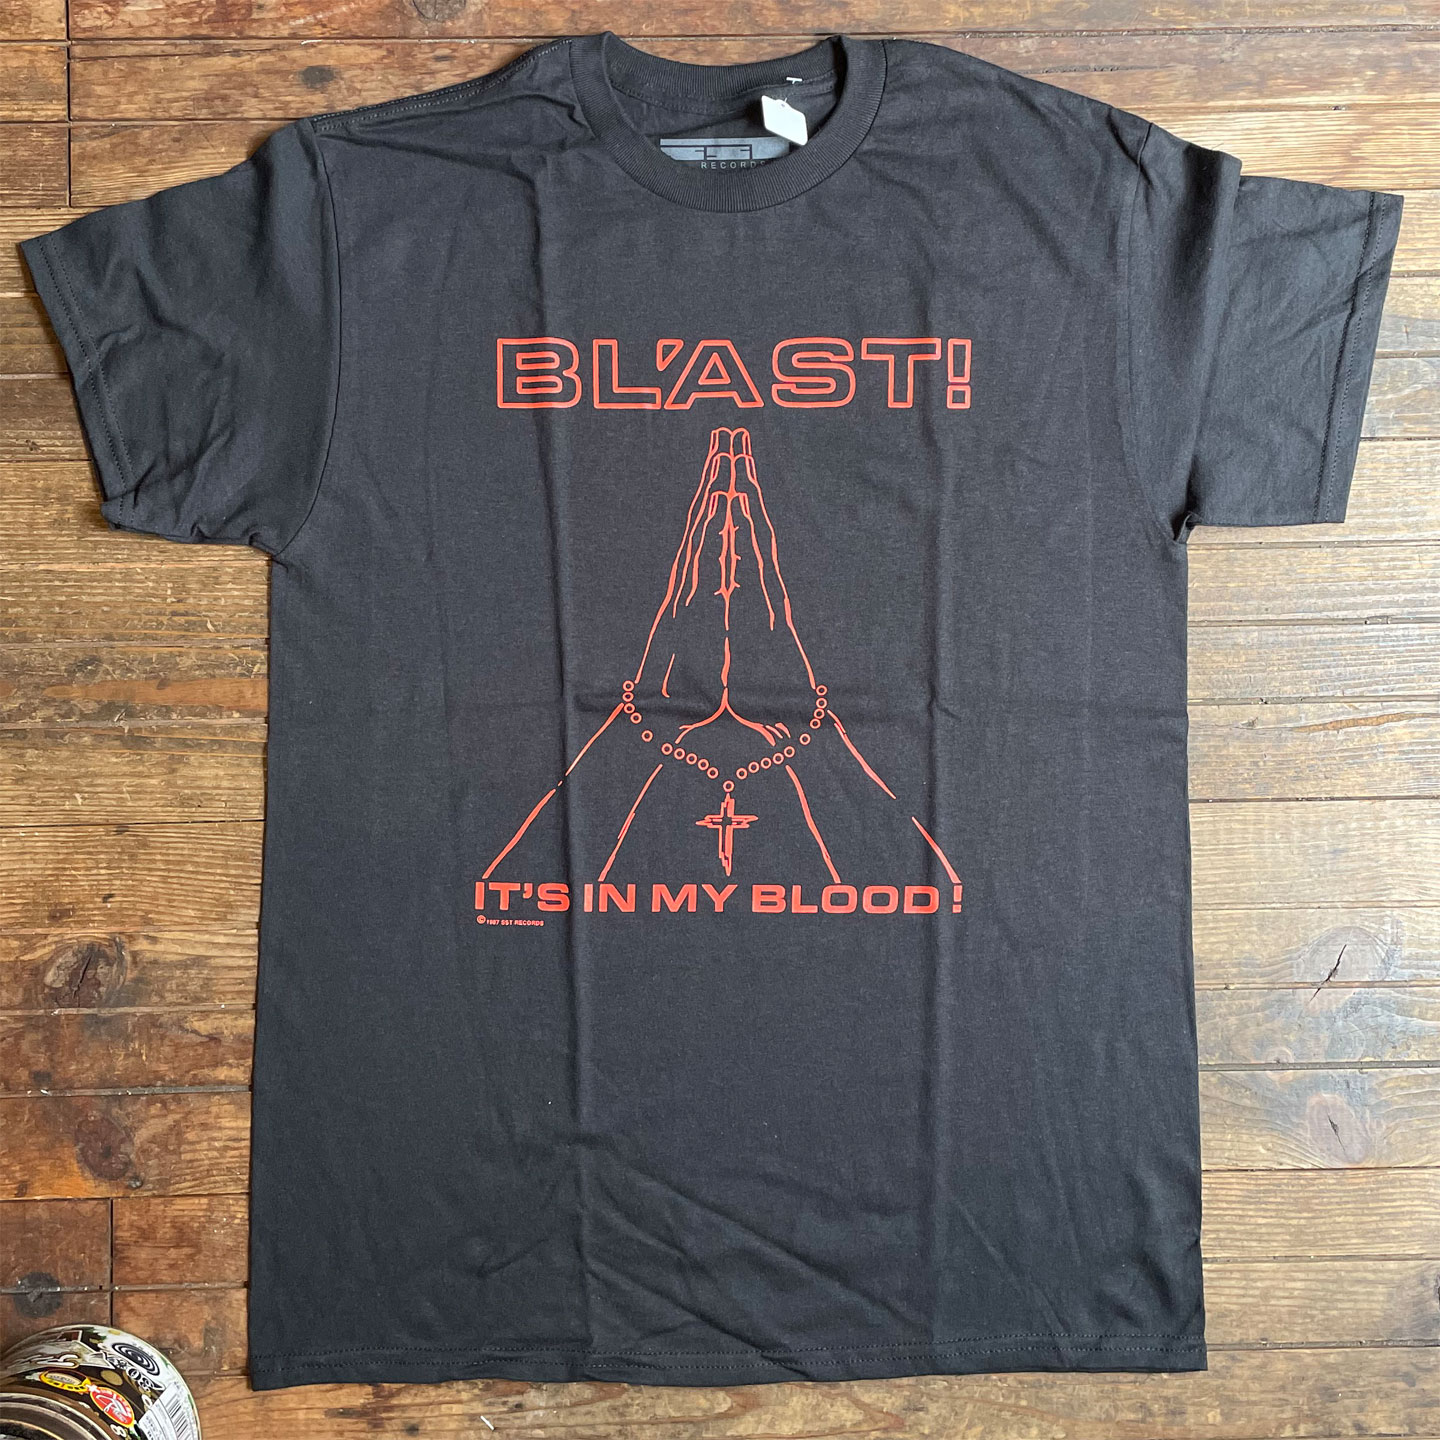 BL'AST! Tシャツ ITS IN MY BLOOD